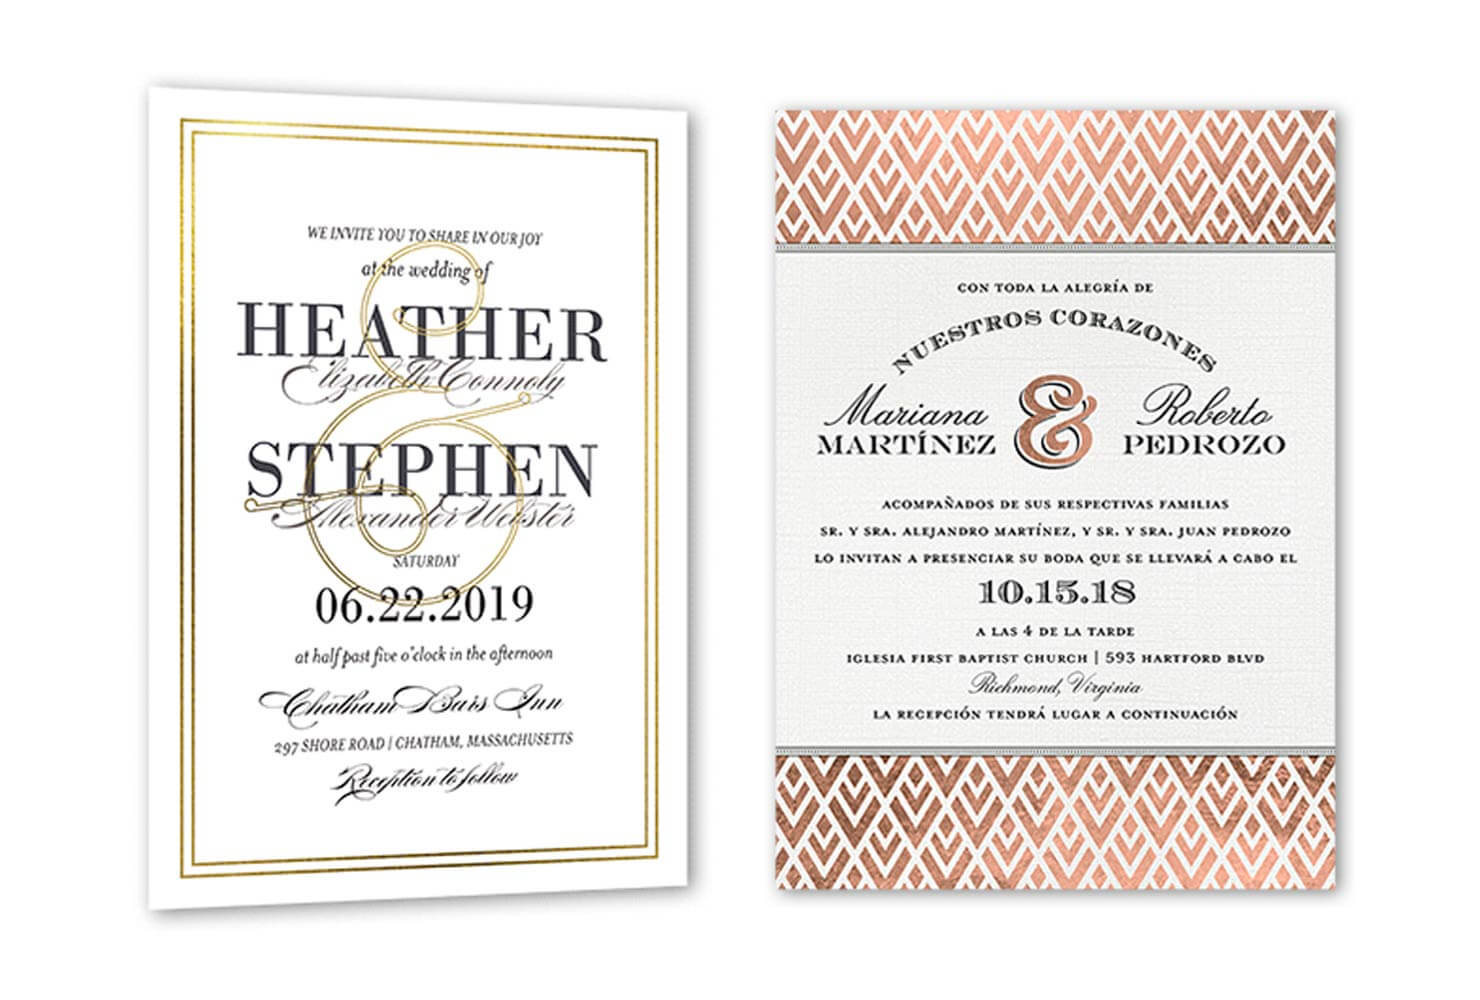 35+ Wedding Invitation Wording Examples 2020 | Shutterfly Intended For Church Wedding Invitation Card Template